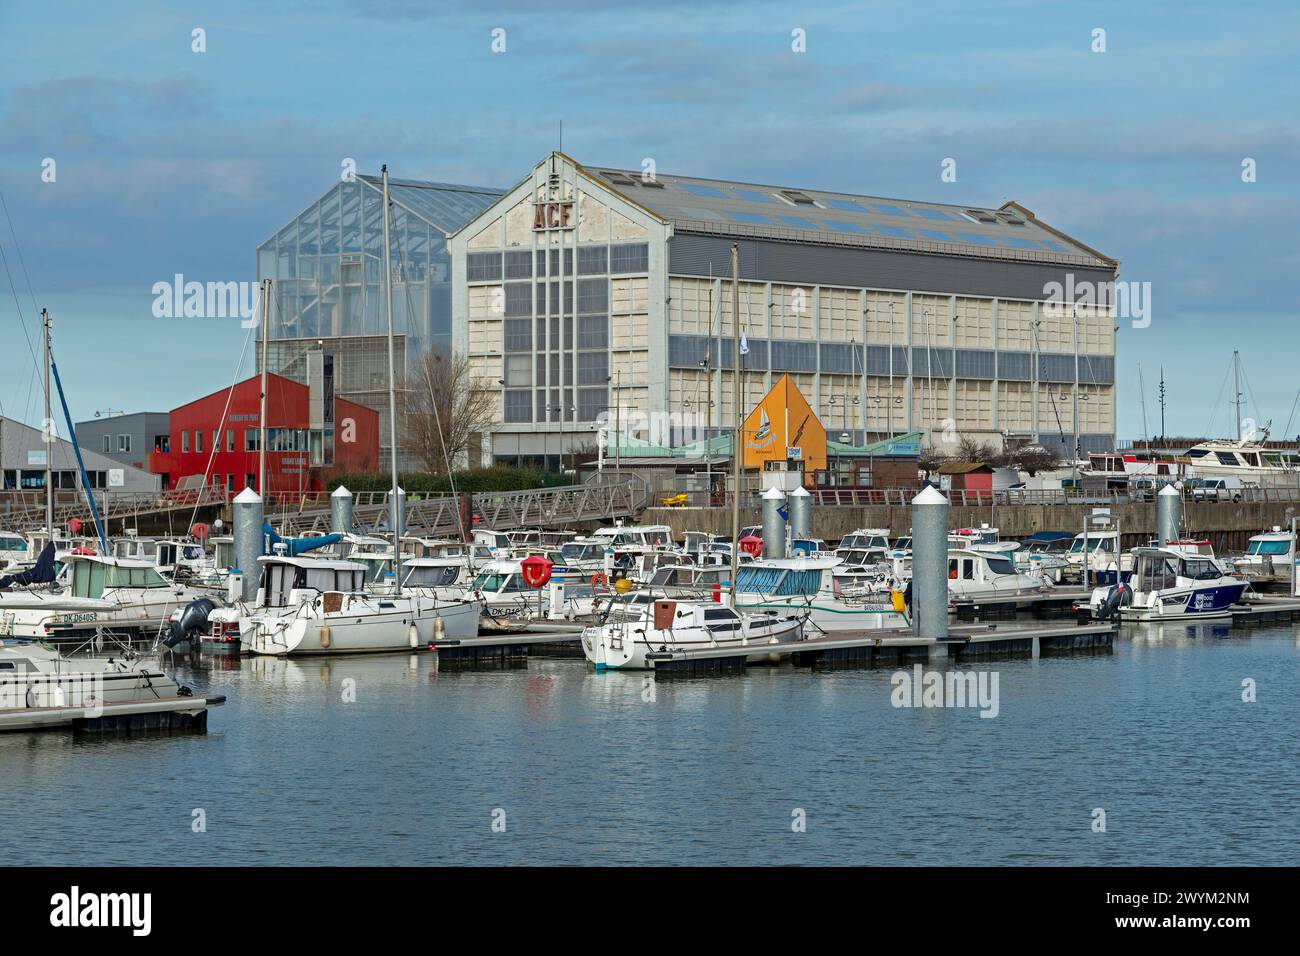 Boats, buildings, marina, Dunkerque, Département Nord, France Stock Photo